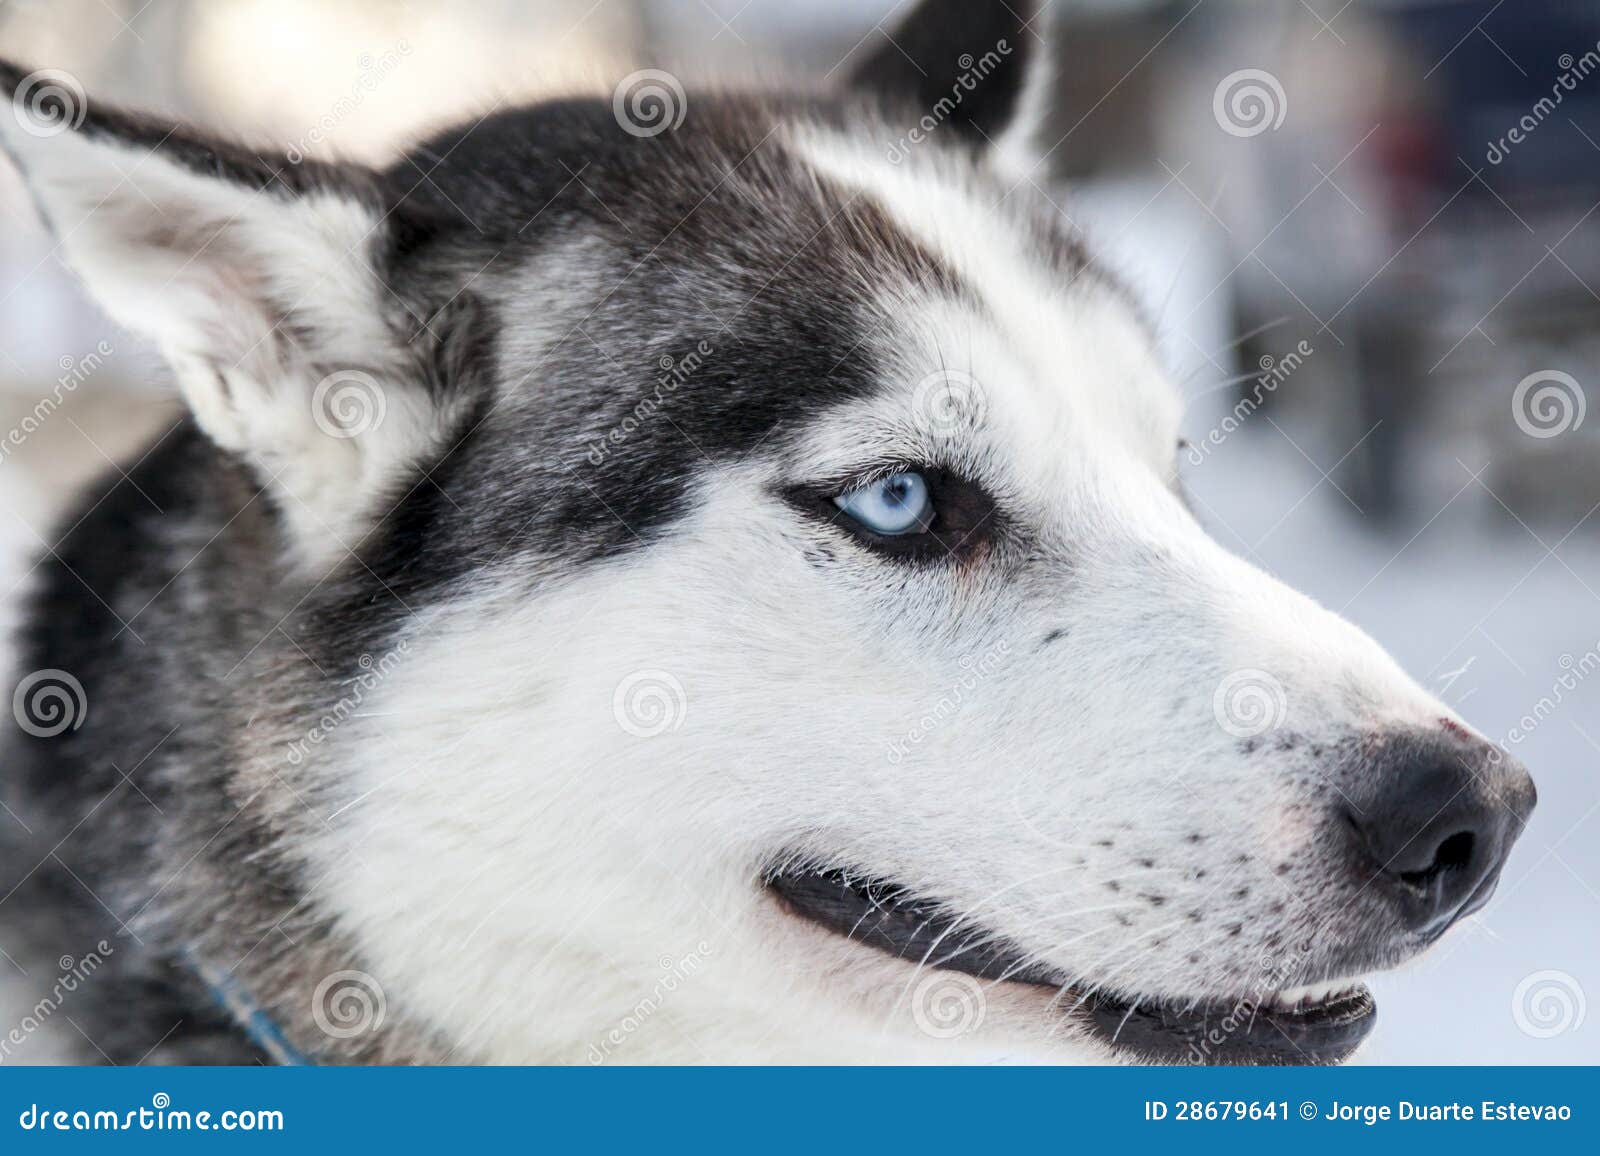 head shot of a husky dog in lapland, finland